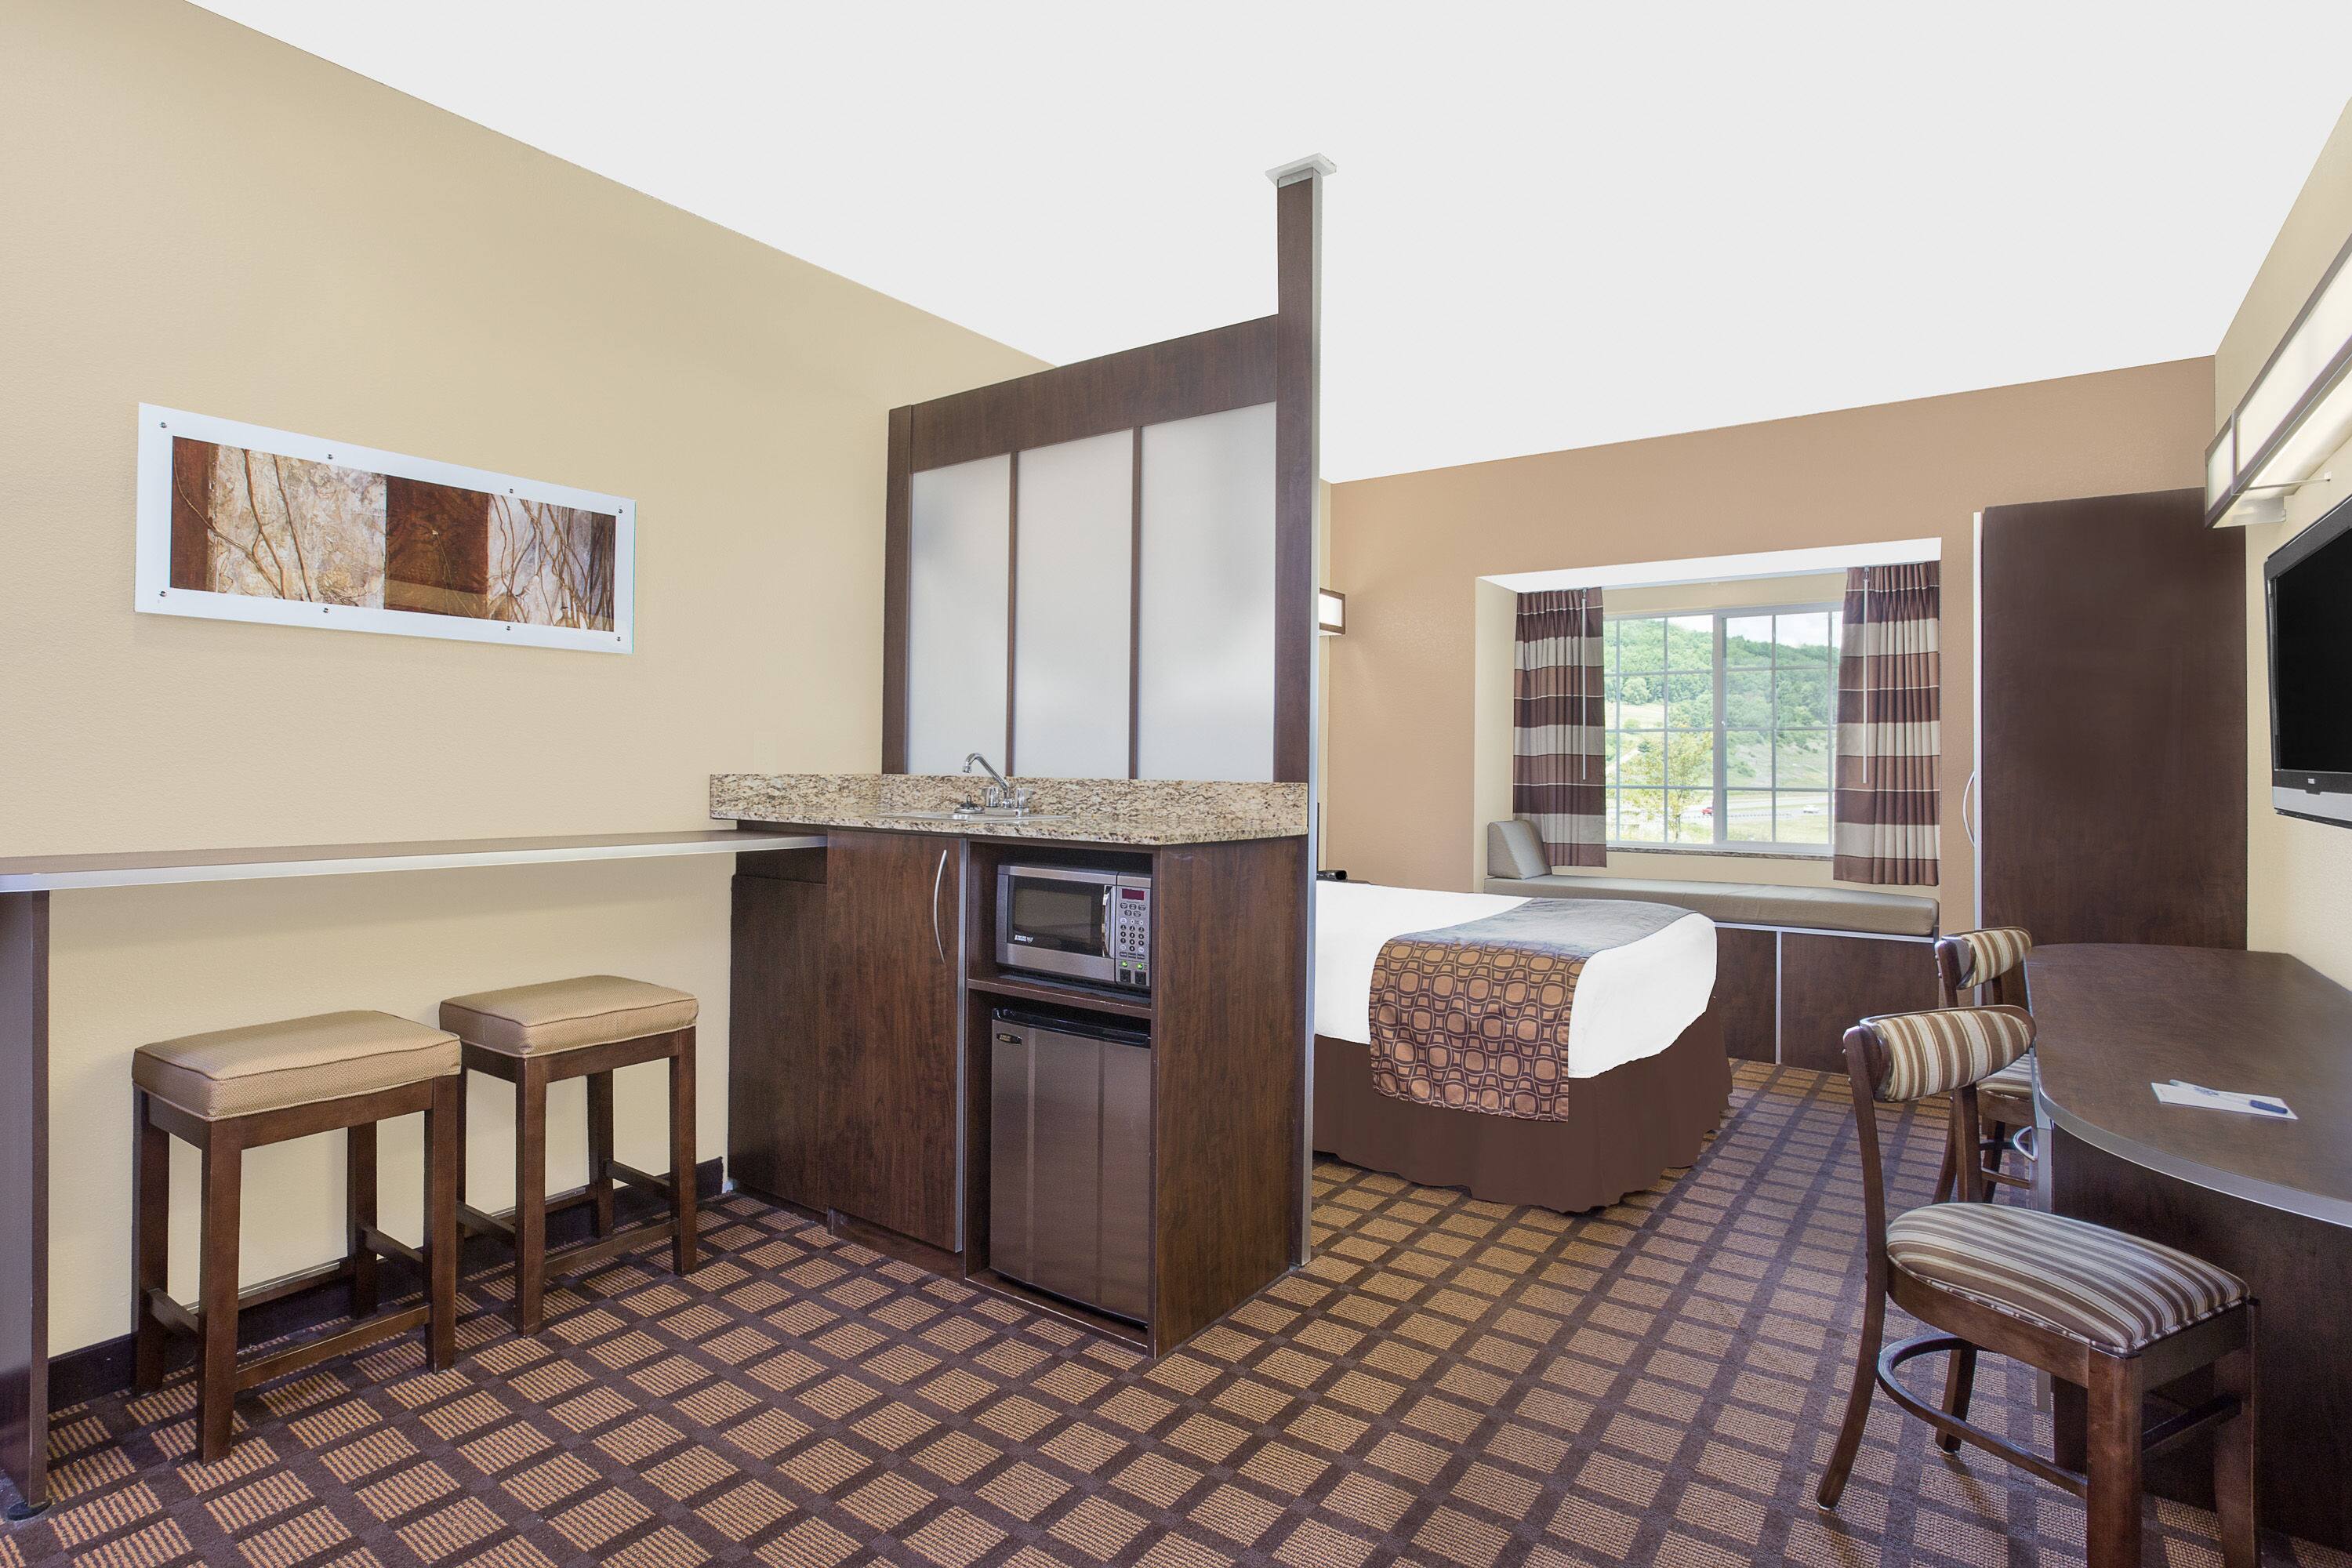 Discount [90% Off] Microtel Inn Suites Mansfield Pa United States - Hotel Near Me | Aria Hotel ...